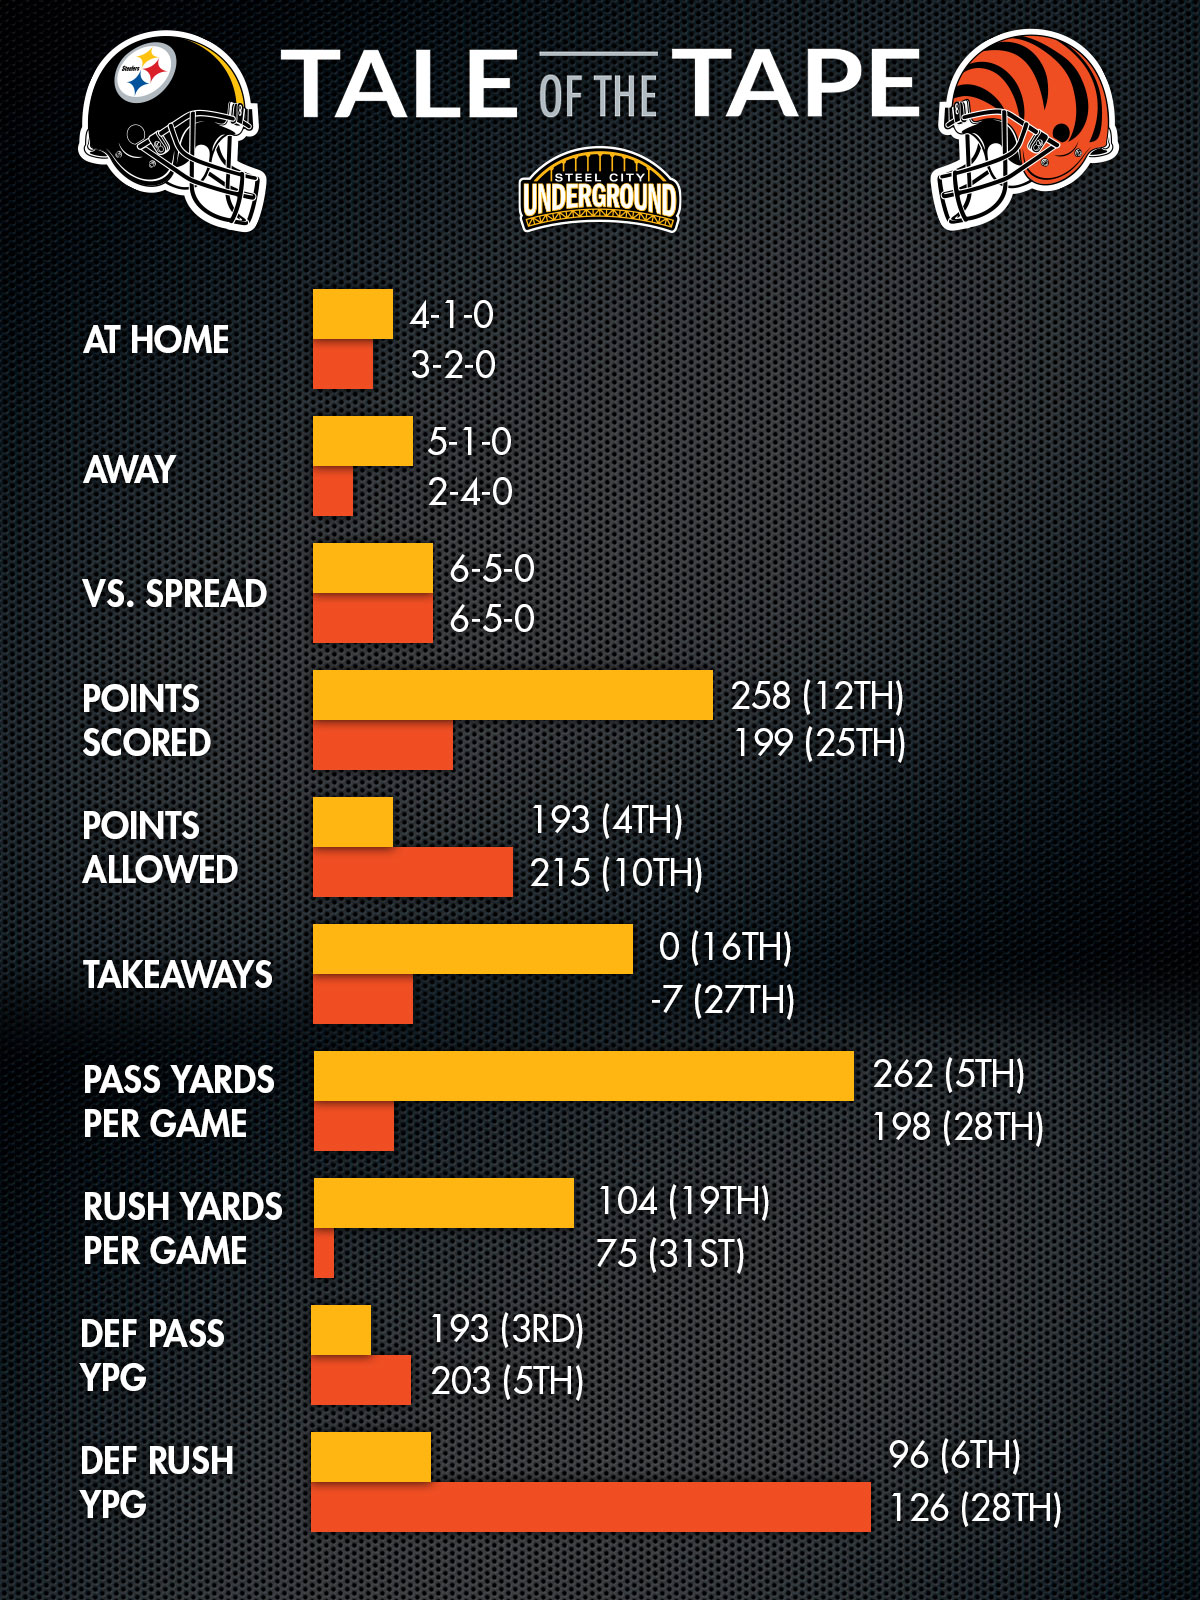 Steelers vs. Bengals Tale of the Tape